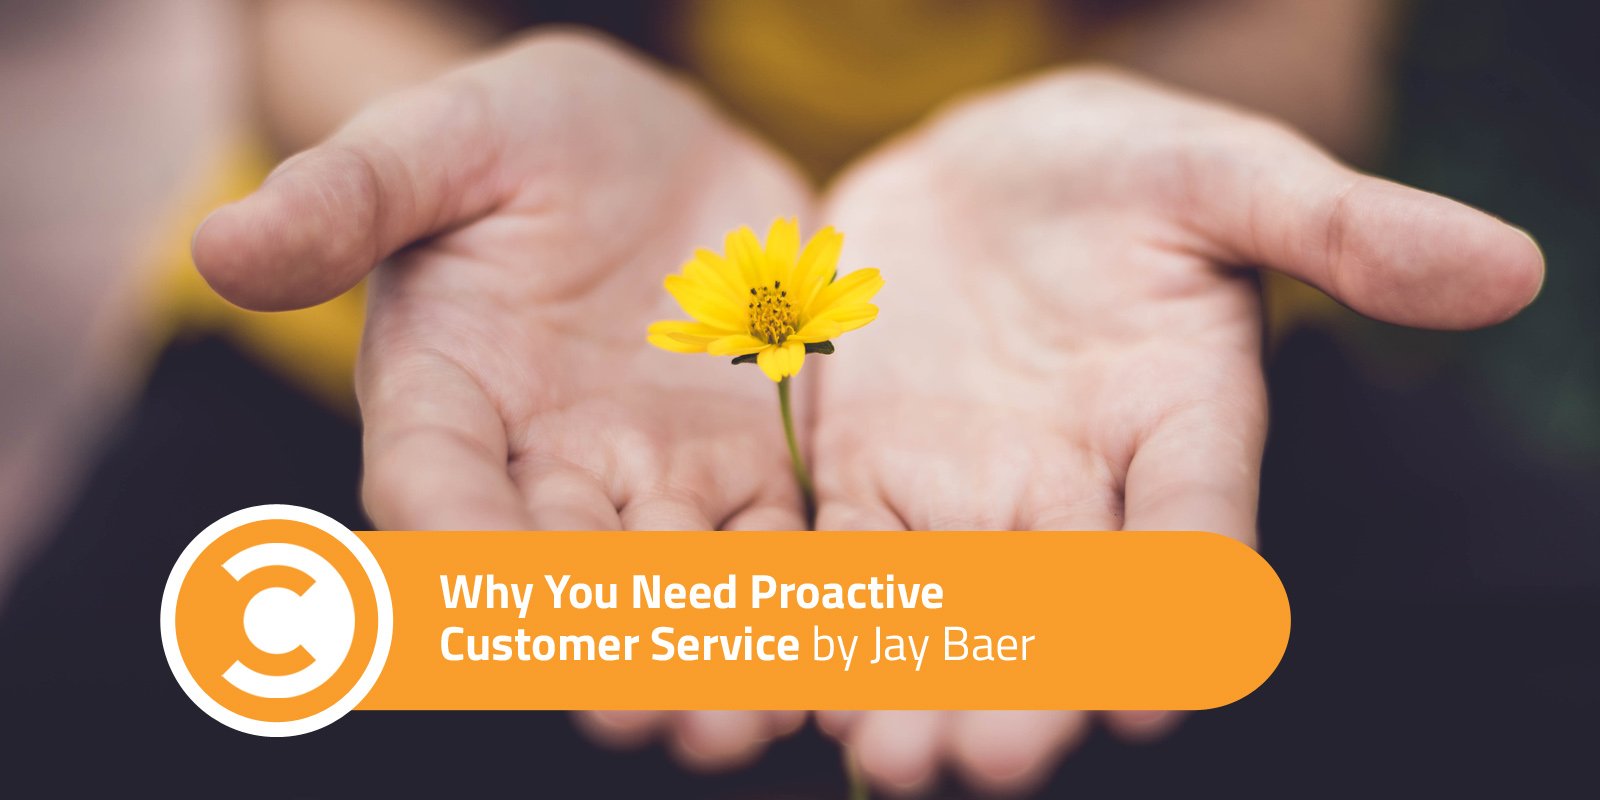 Why You Need Proactive Customer Service